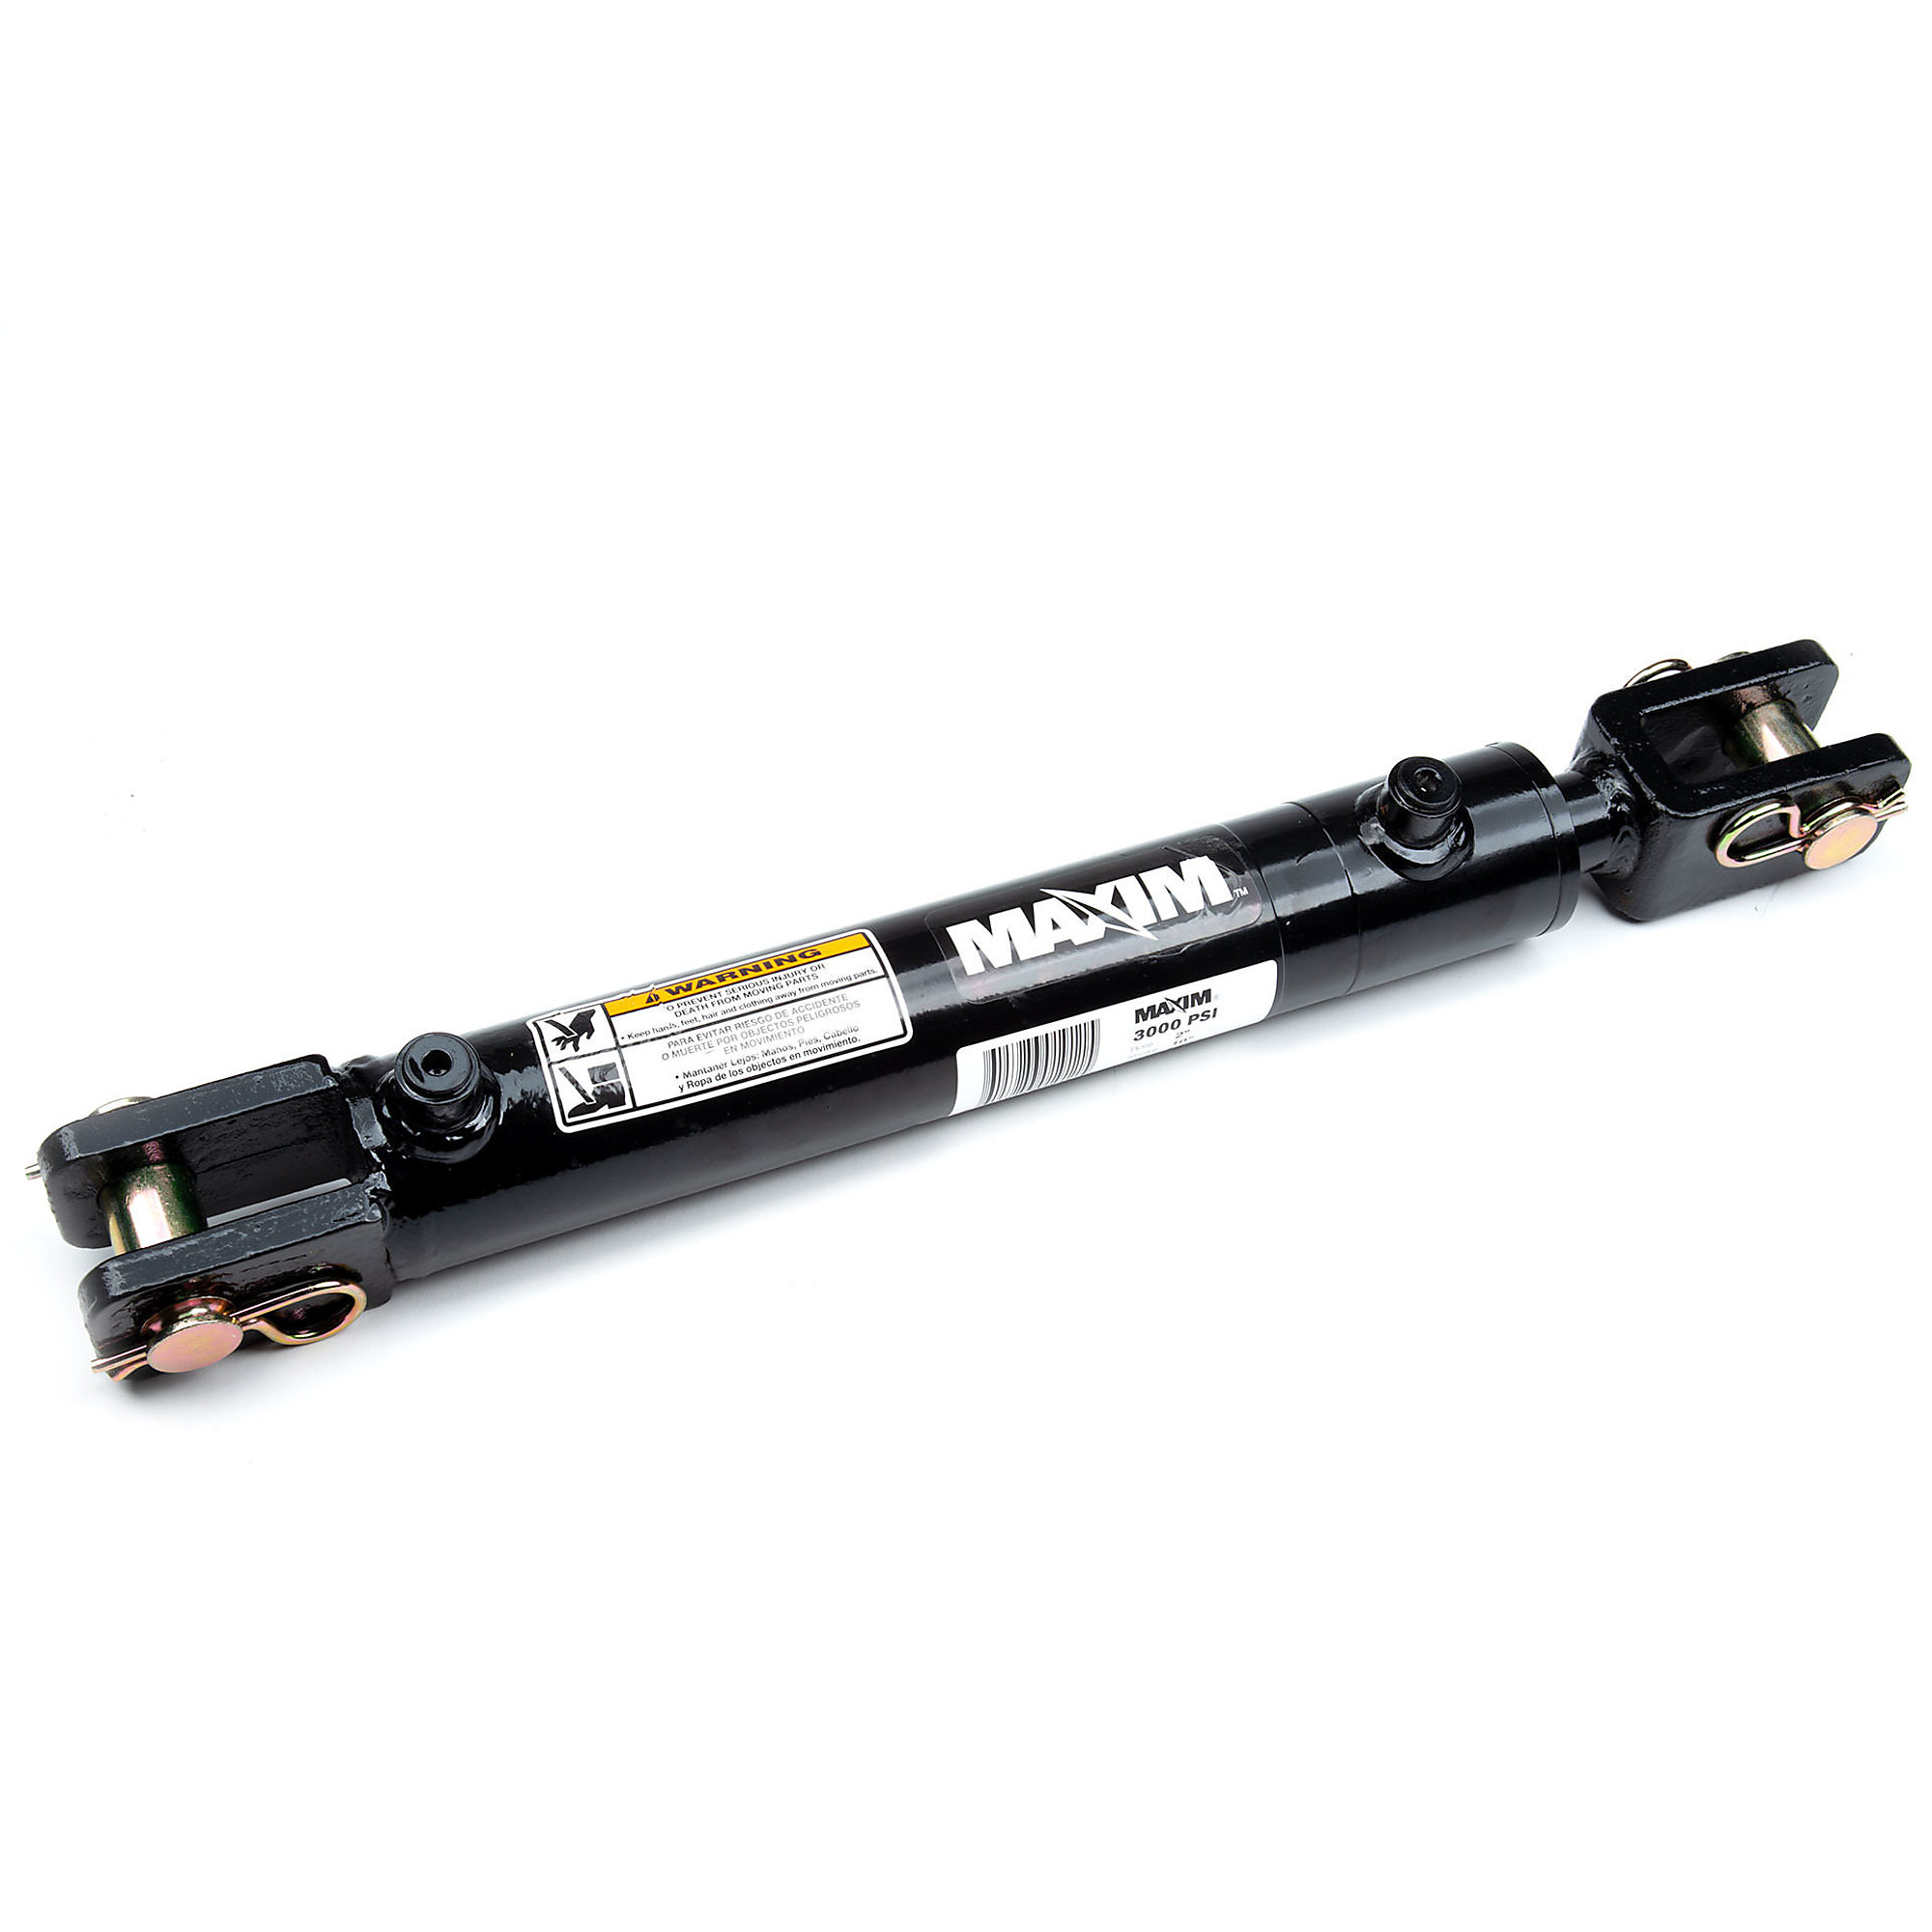 Maxim, WC Welded Cylinder, Max. PSI 3000, Bore Diameter 2 in, Stroke Length 12 in, Model 288405